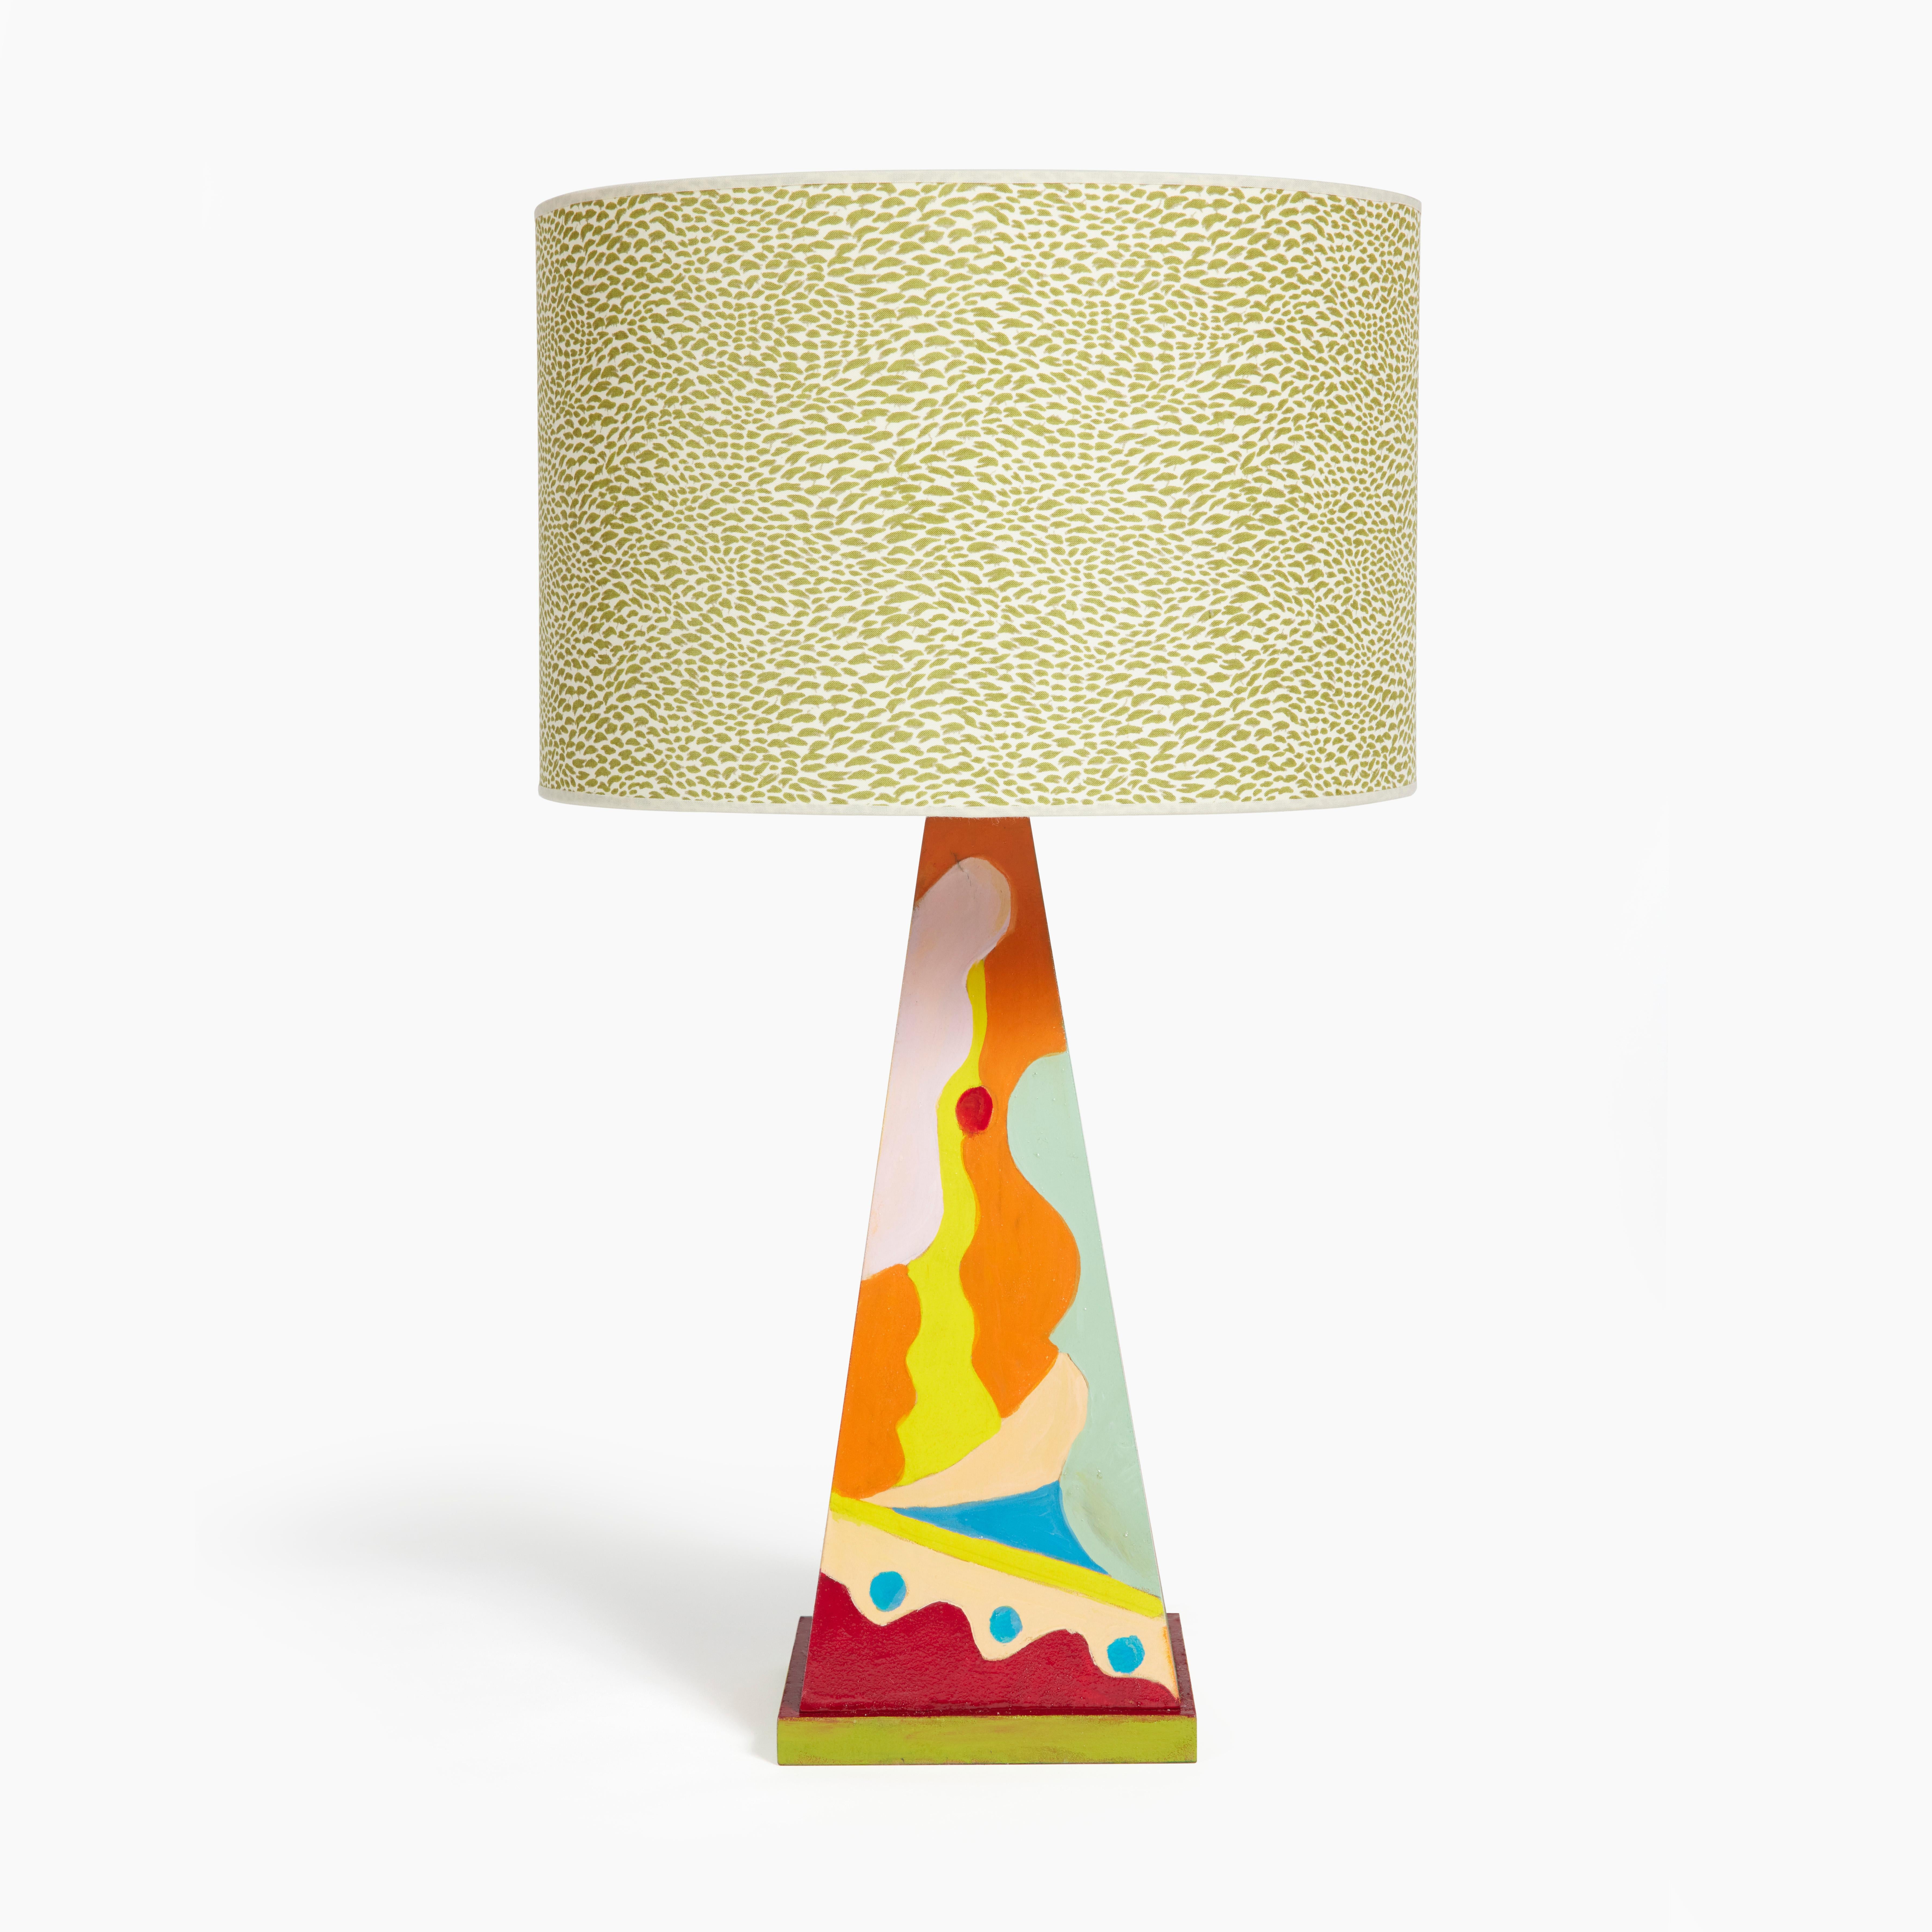 Lamp painted by Laura GONZALEZ.
Wooden base, lampshade in fabric by Maison Pierre FREY.
Made In France.